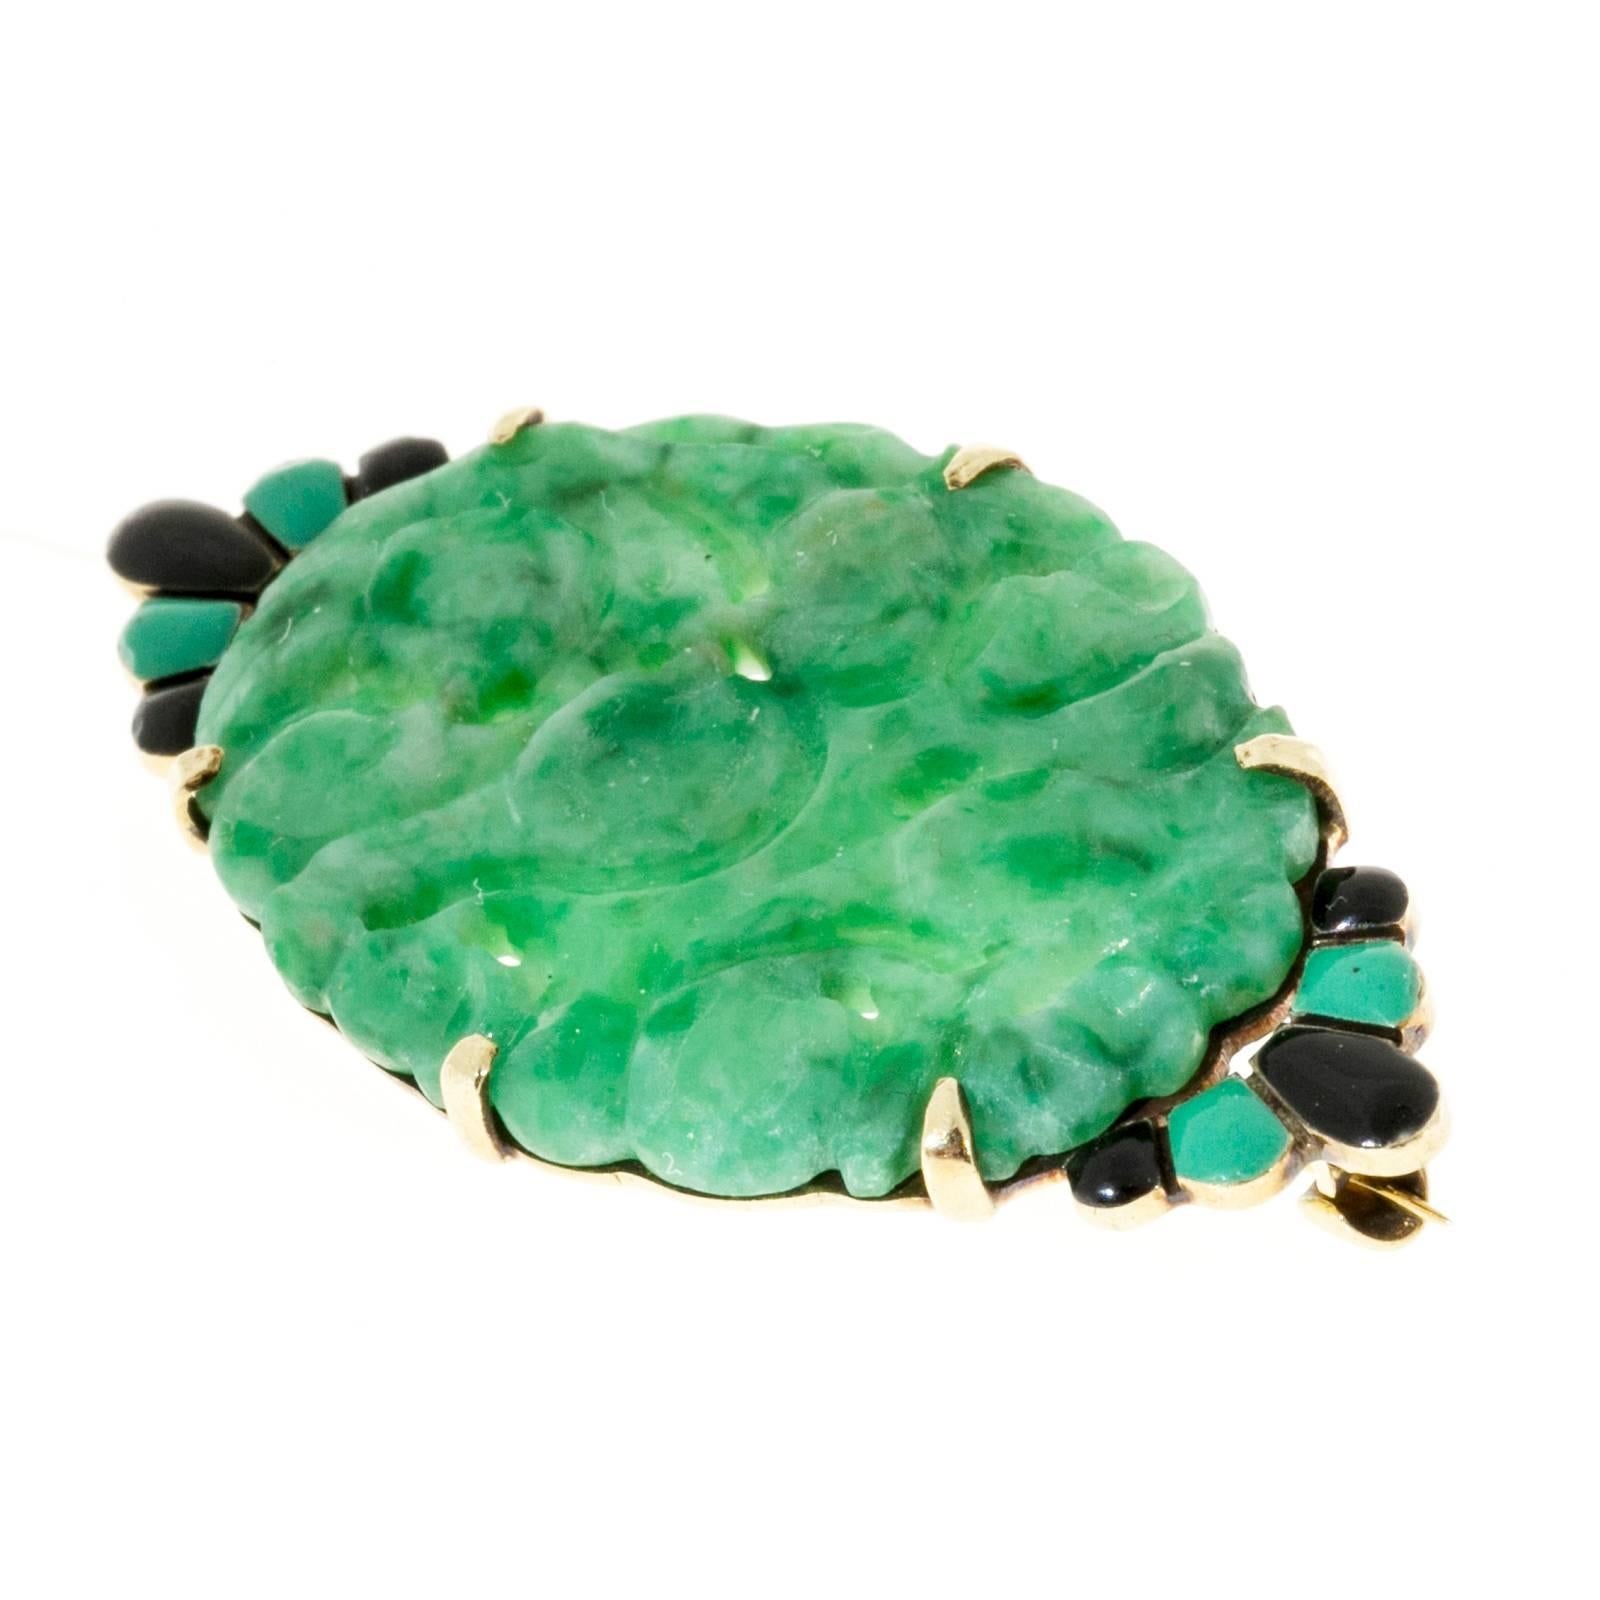 Original 1940 Art Deco pin with black and green enamel and natural green Jadeite Jade.

GIA certified natural color non enhanced Jadeite Jade 28.75 x 19.70 x 2.85mm carved tablet. GIA 2155122484
14k Yellow Gold
Stamped: 14k WL
Black and green